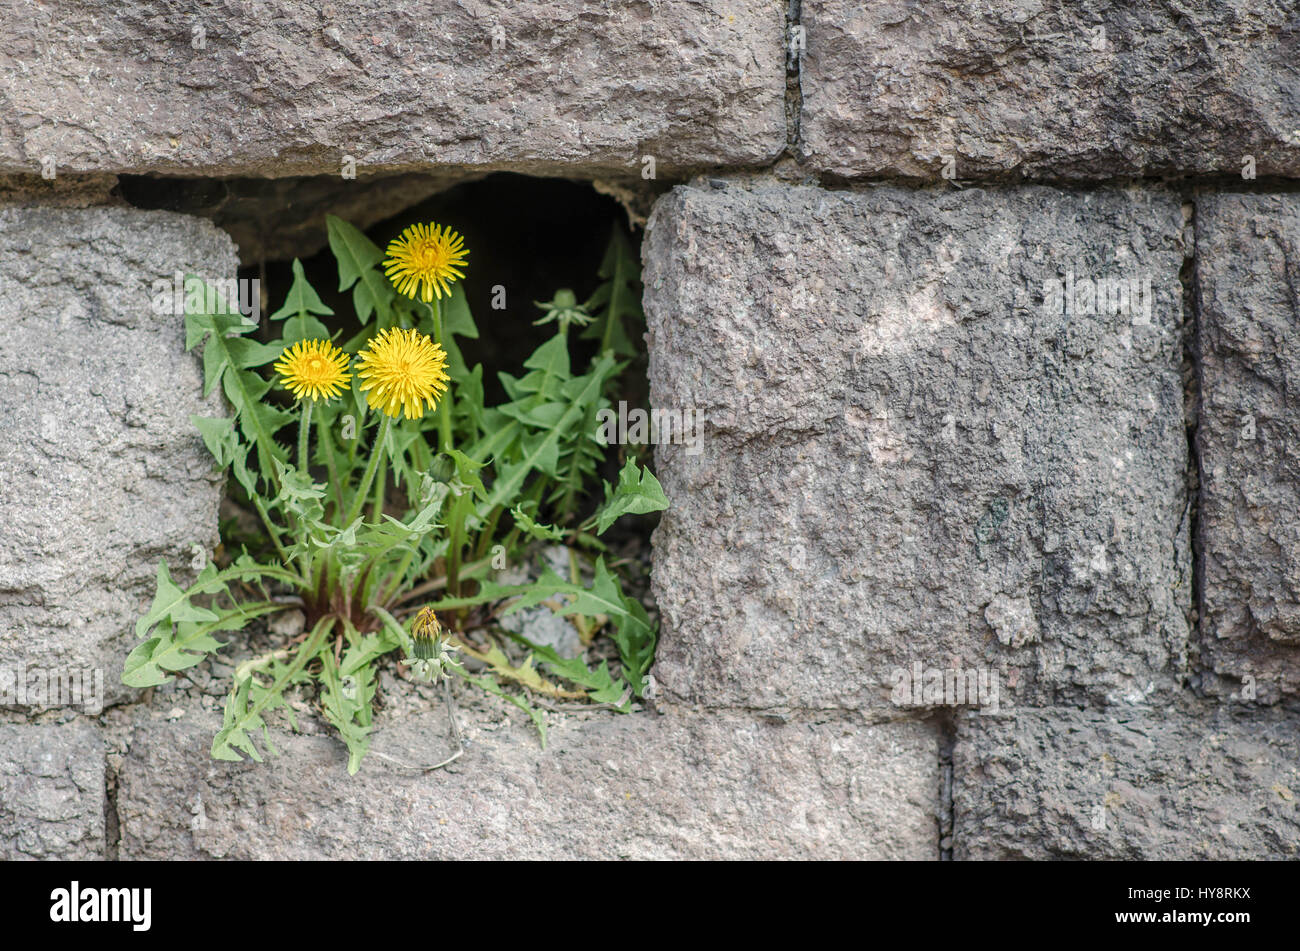 dandelion flowers growing in a hole in a brick wall Stock Photo